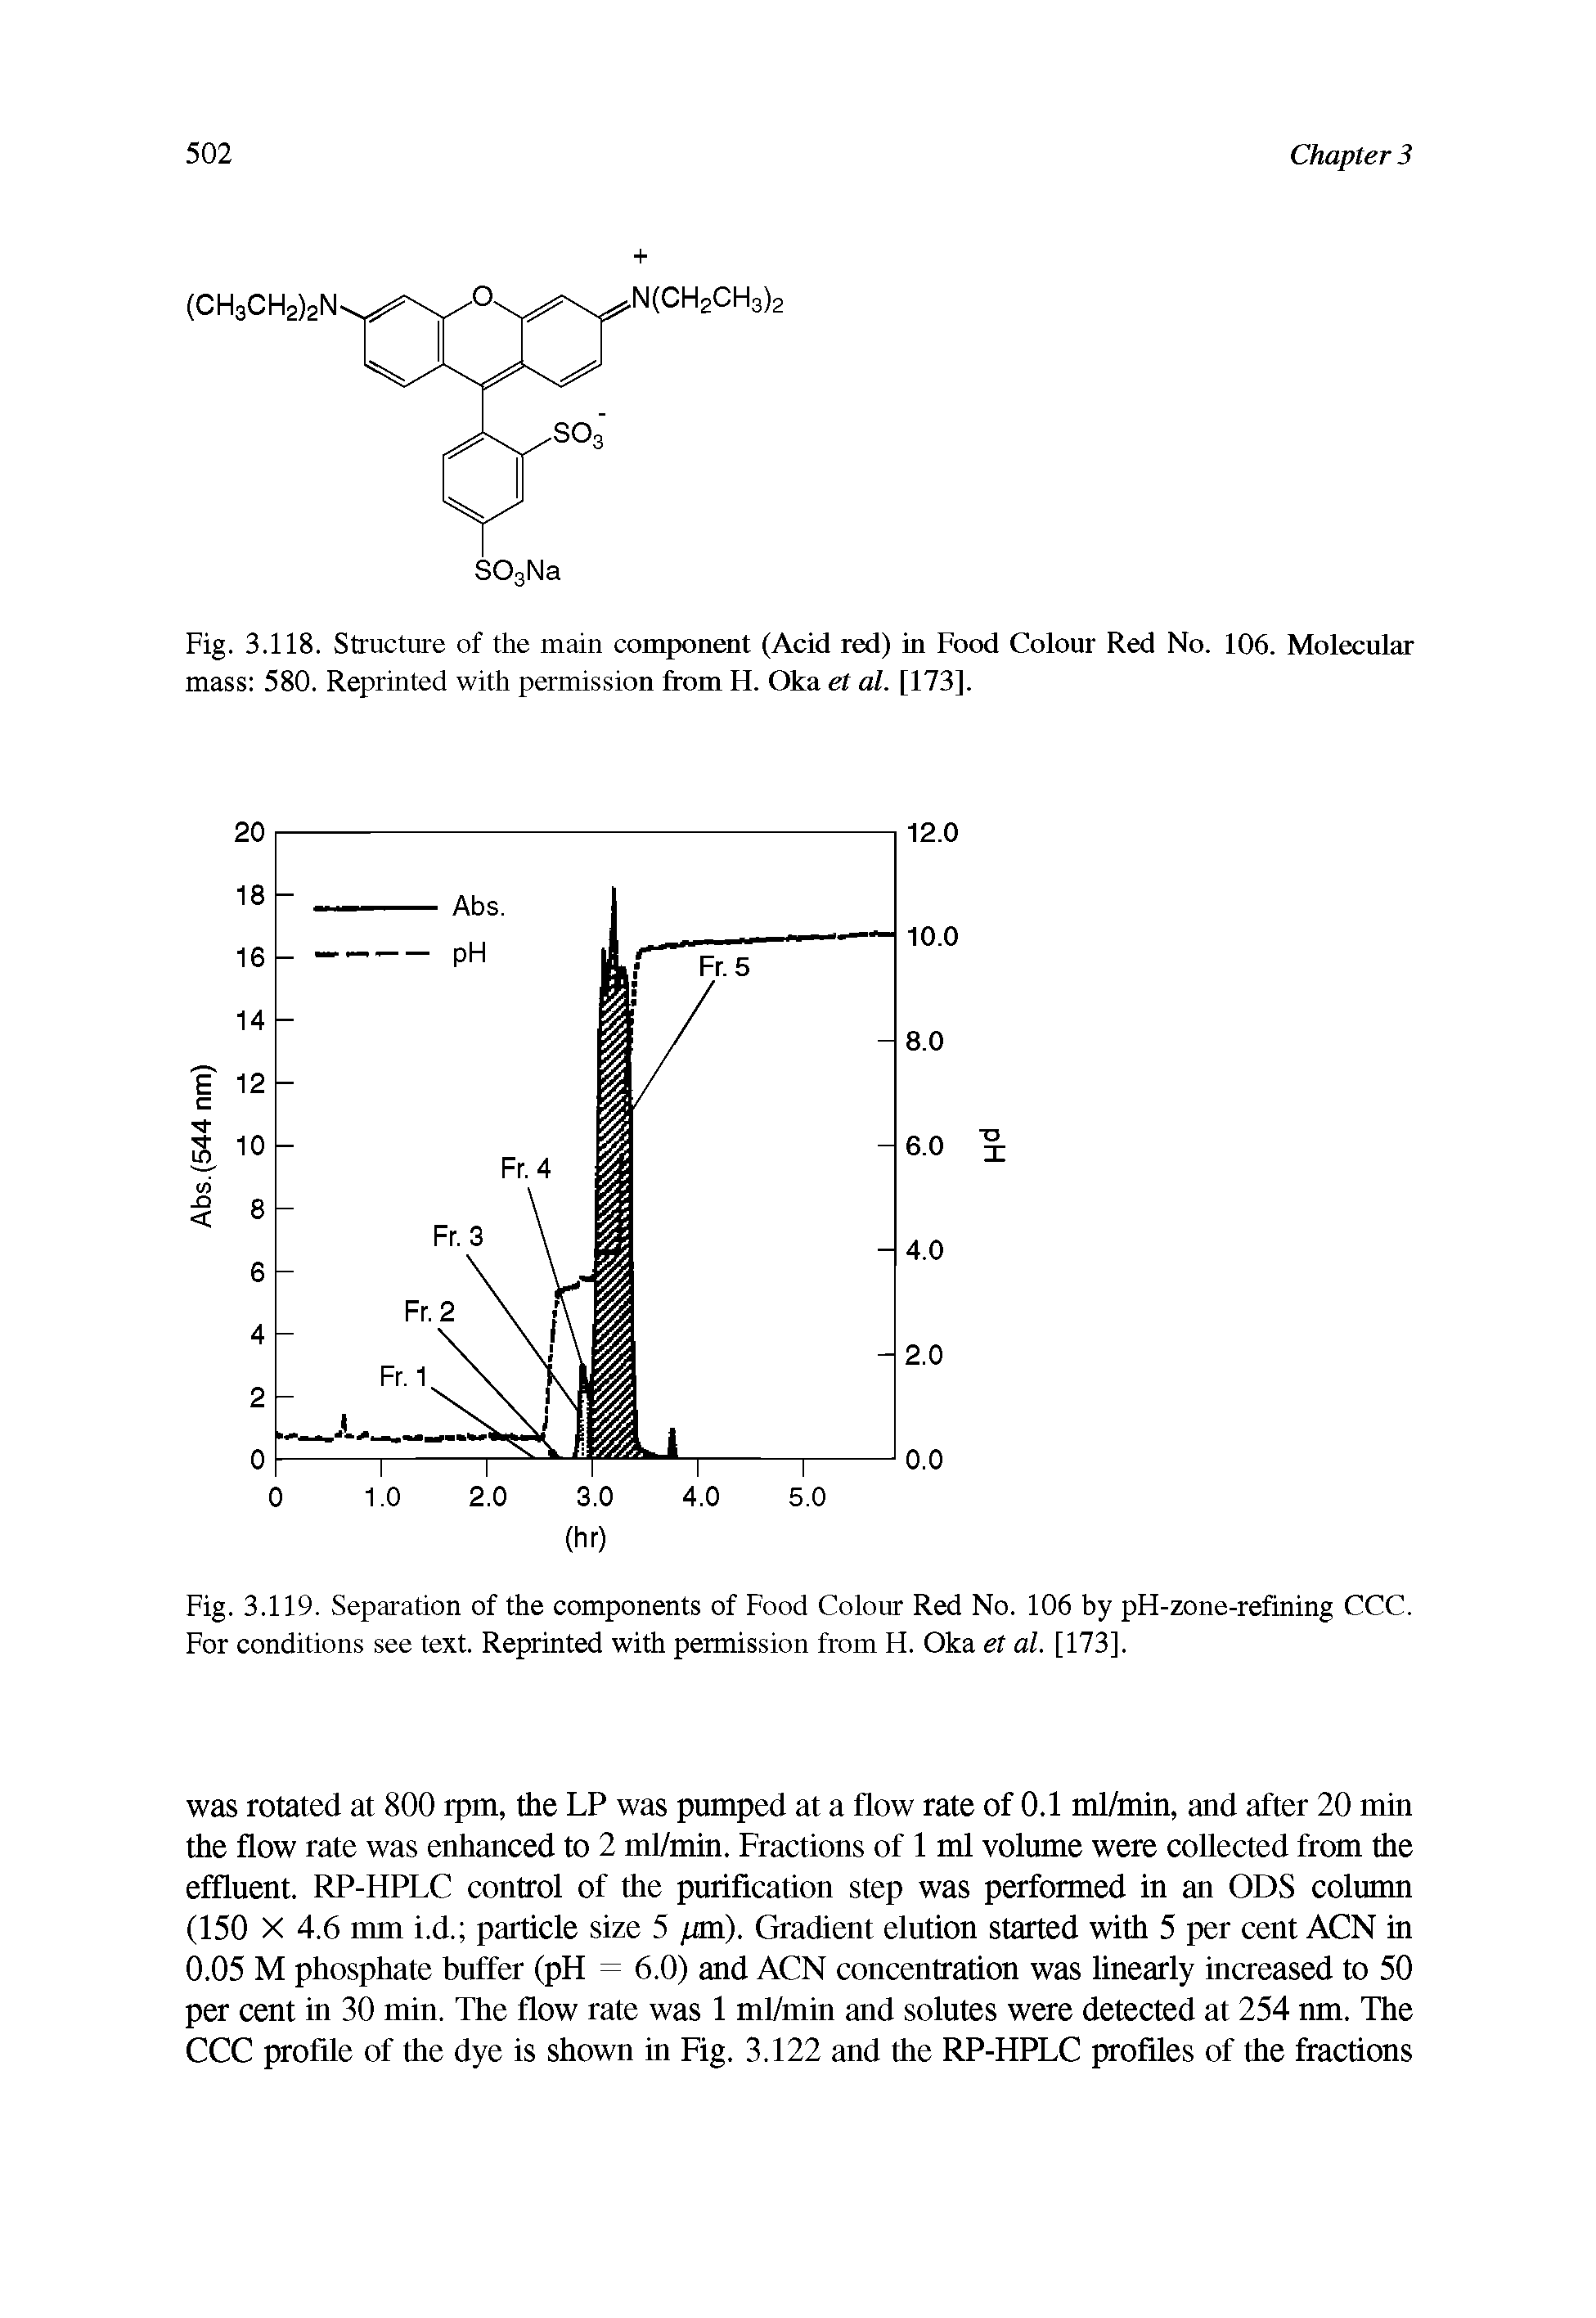 Fig. 3.119. Separation of the components of Food Colour Red No. 106 by pH-zone-refining CCC. For conditions see text. Reprinted with permission from H. Oka et al. [173],...